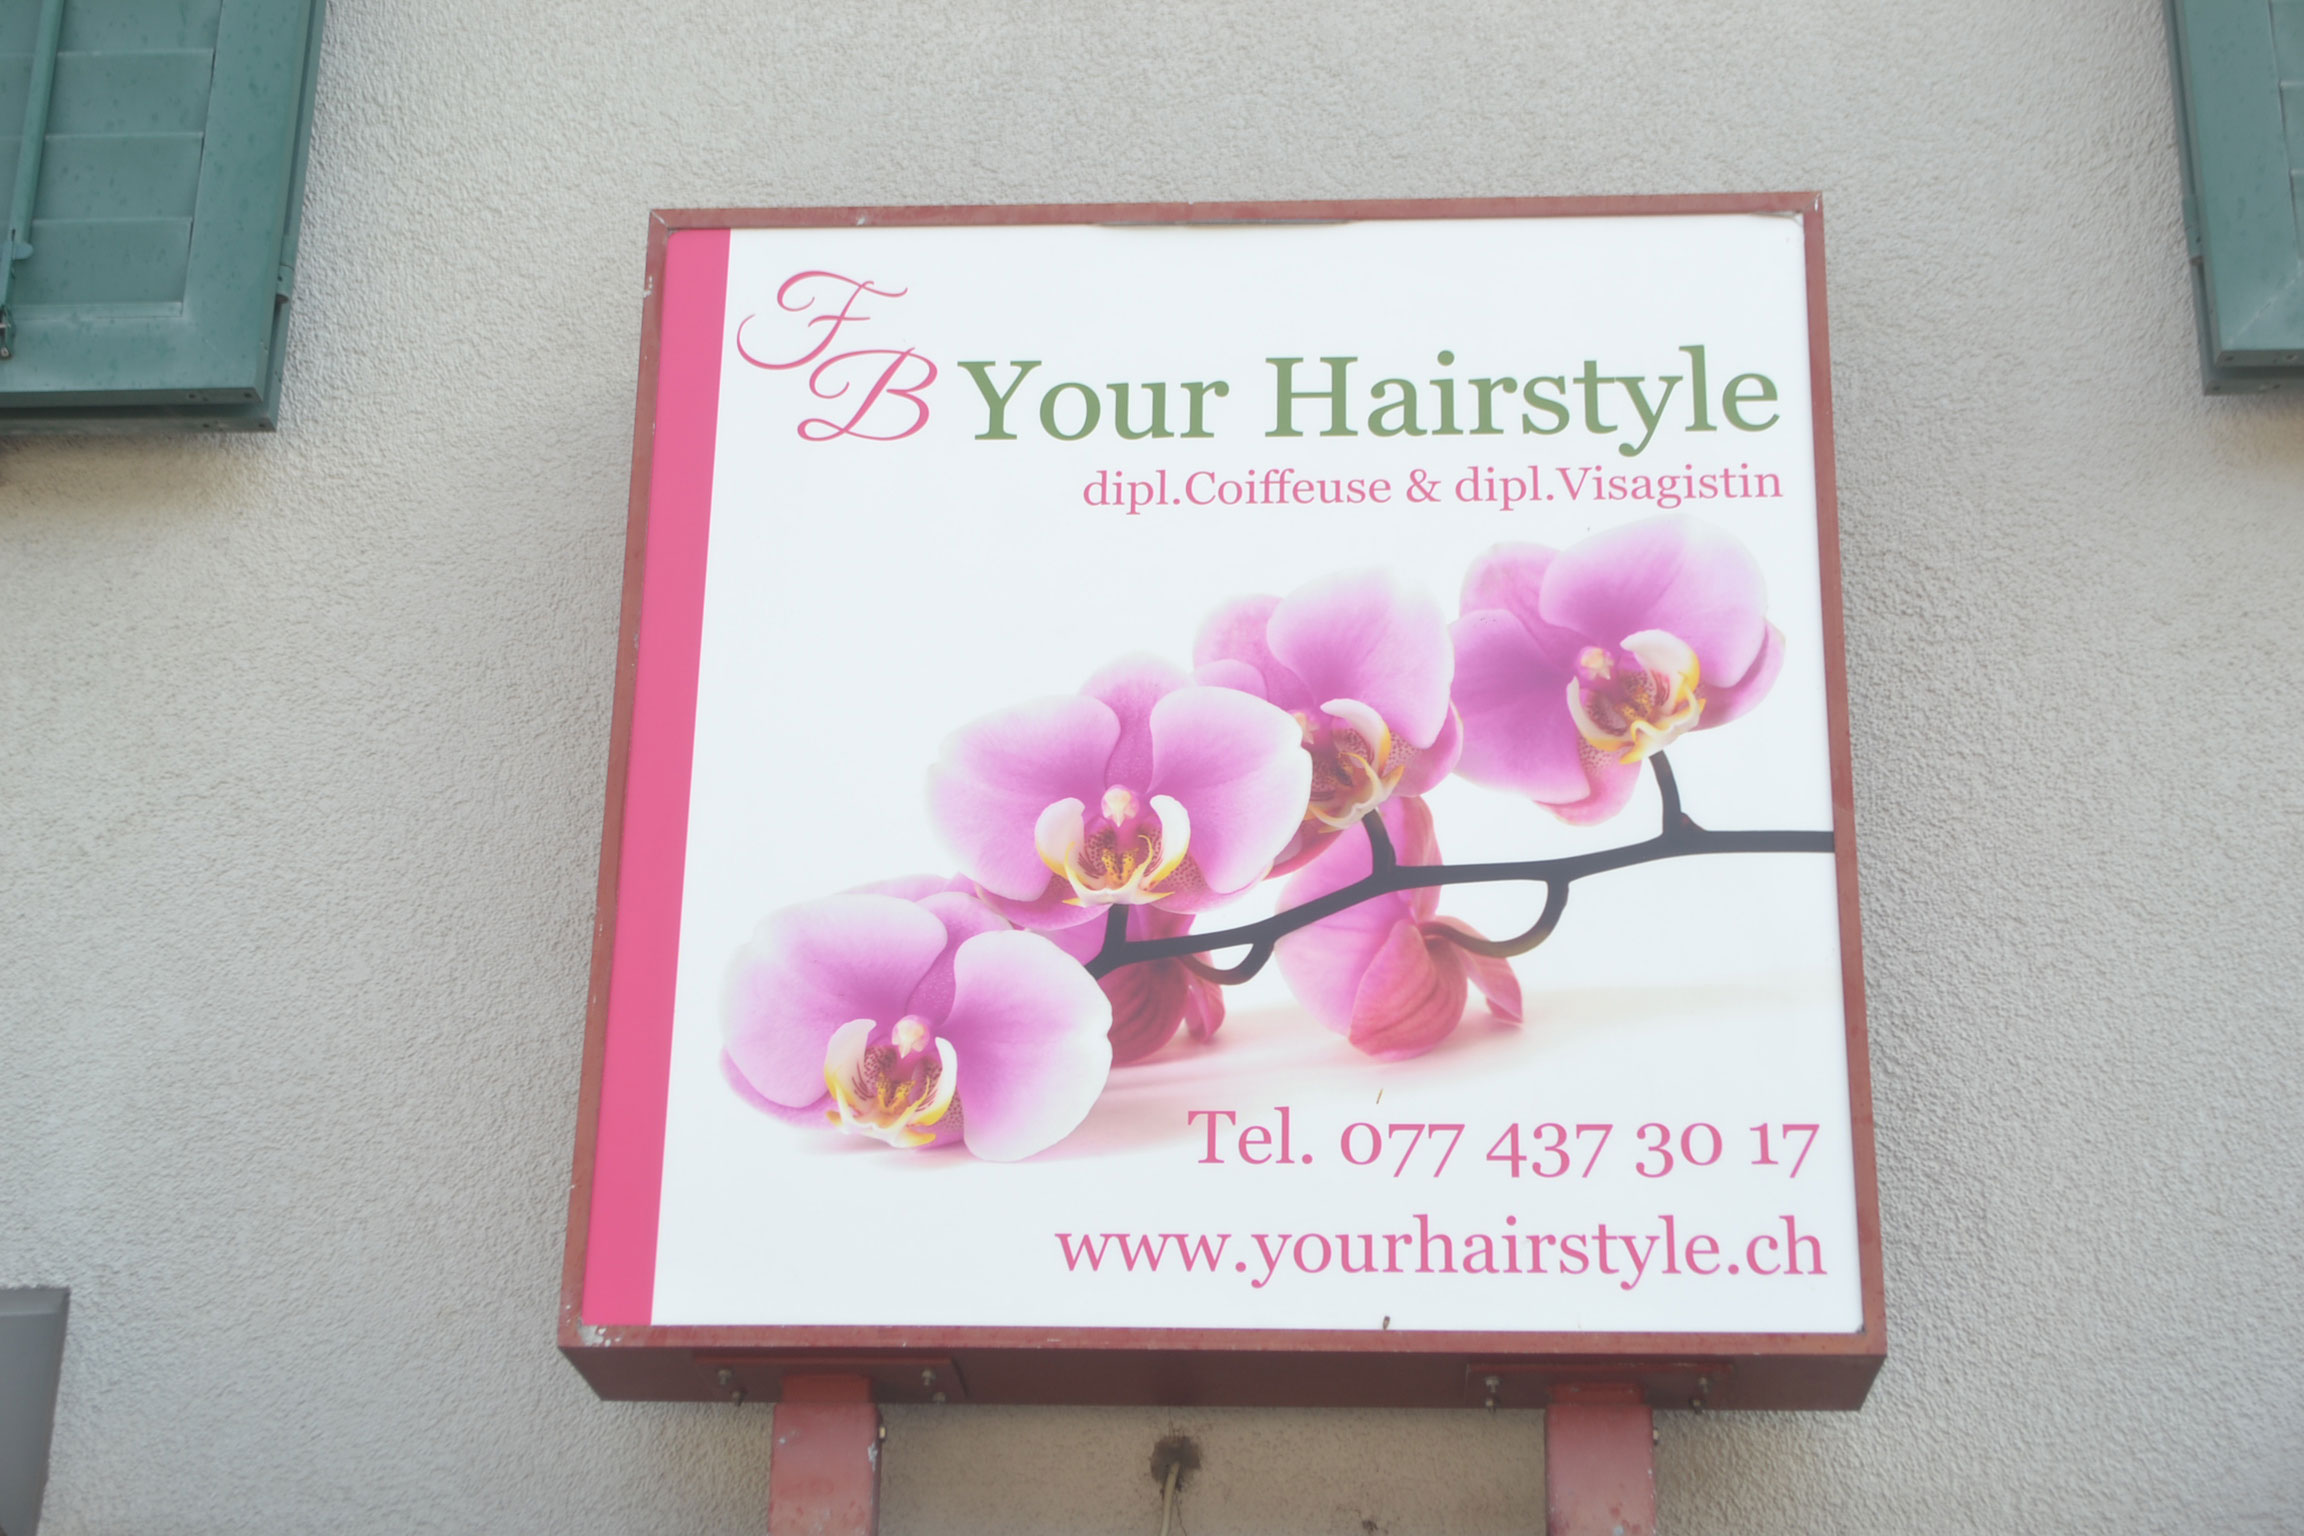 Coiffeur Your Hairstyle